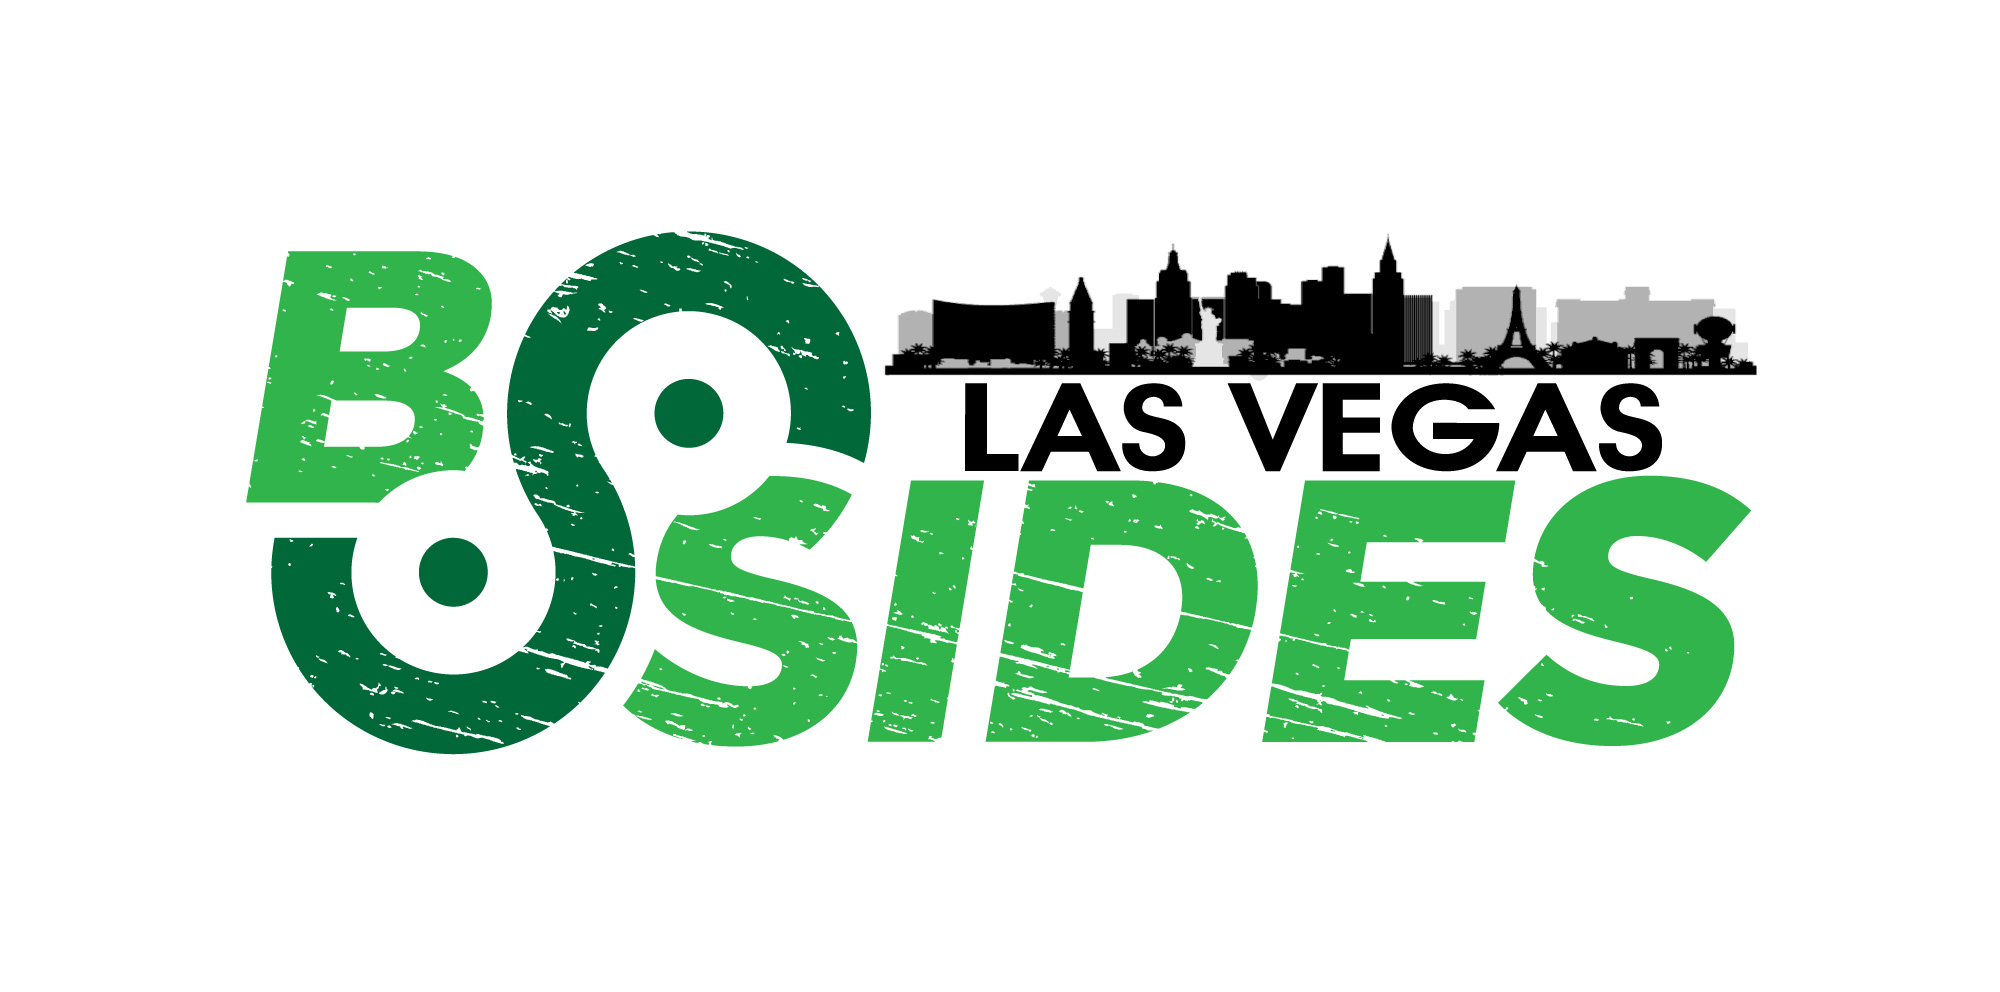 101 ways to fail at security analytics  and how not to do that -  BSidesLV 2018